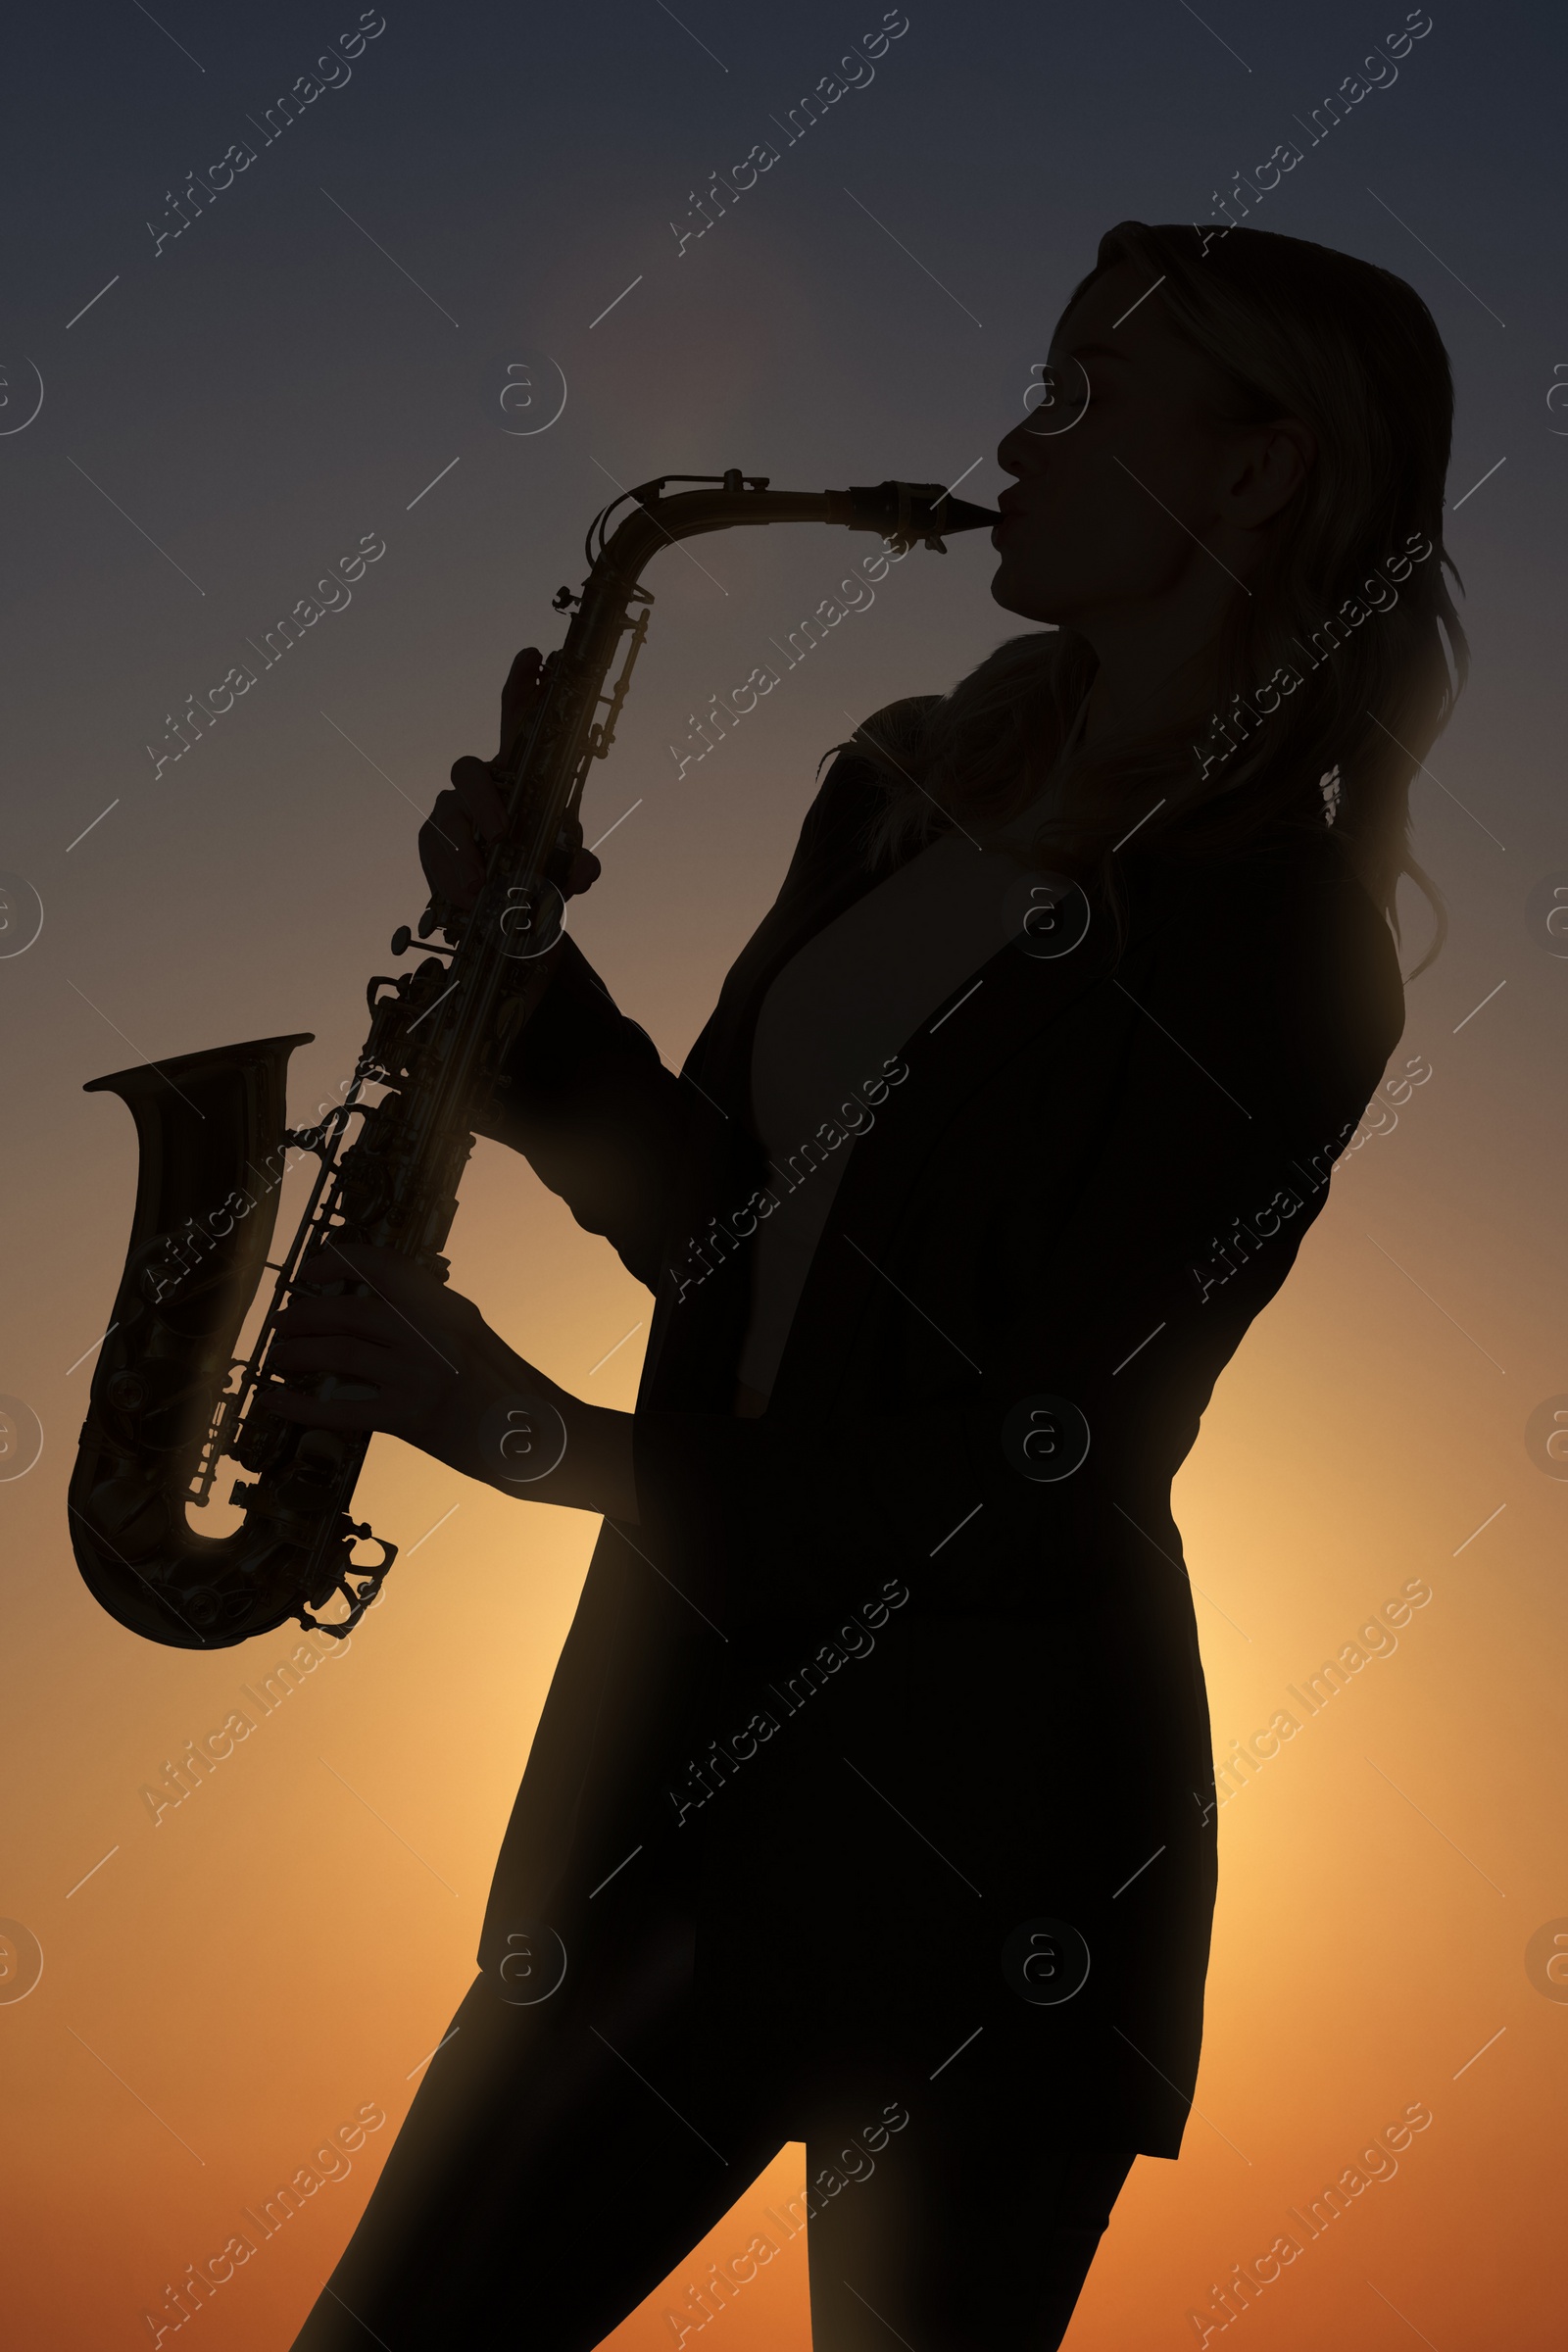 Image of Silhouette of woman playing saxophone against beautiful sky at sunset